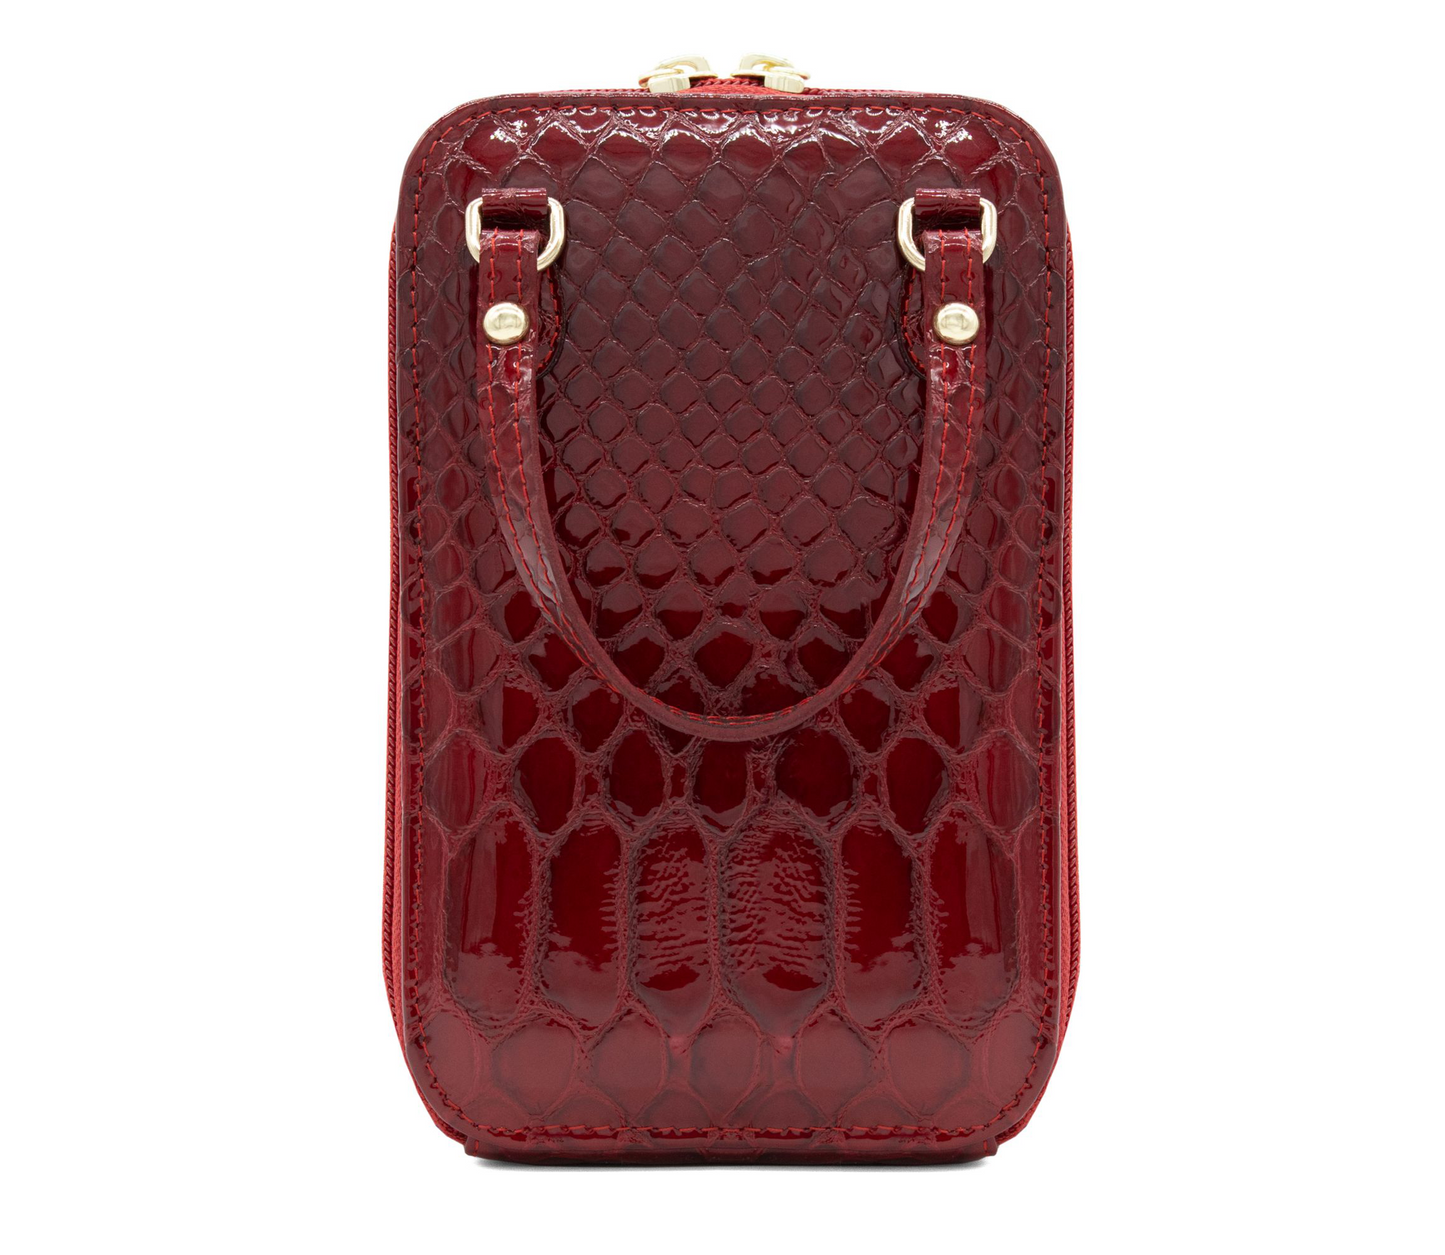 #color_ Red | Cavalinho Gallop Patent Leather Phone Purse - Red - Artboard3